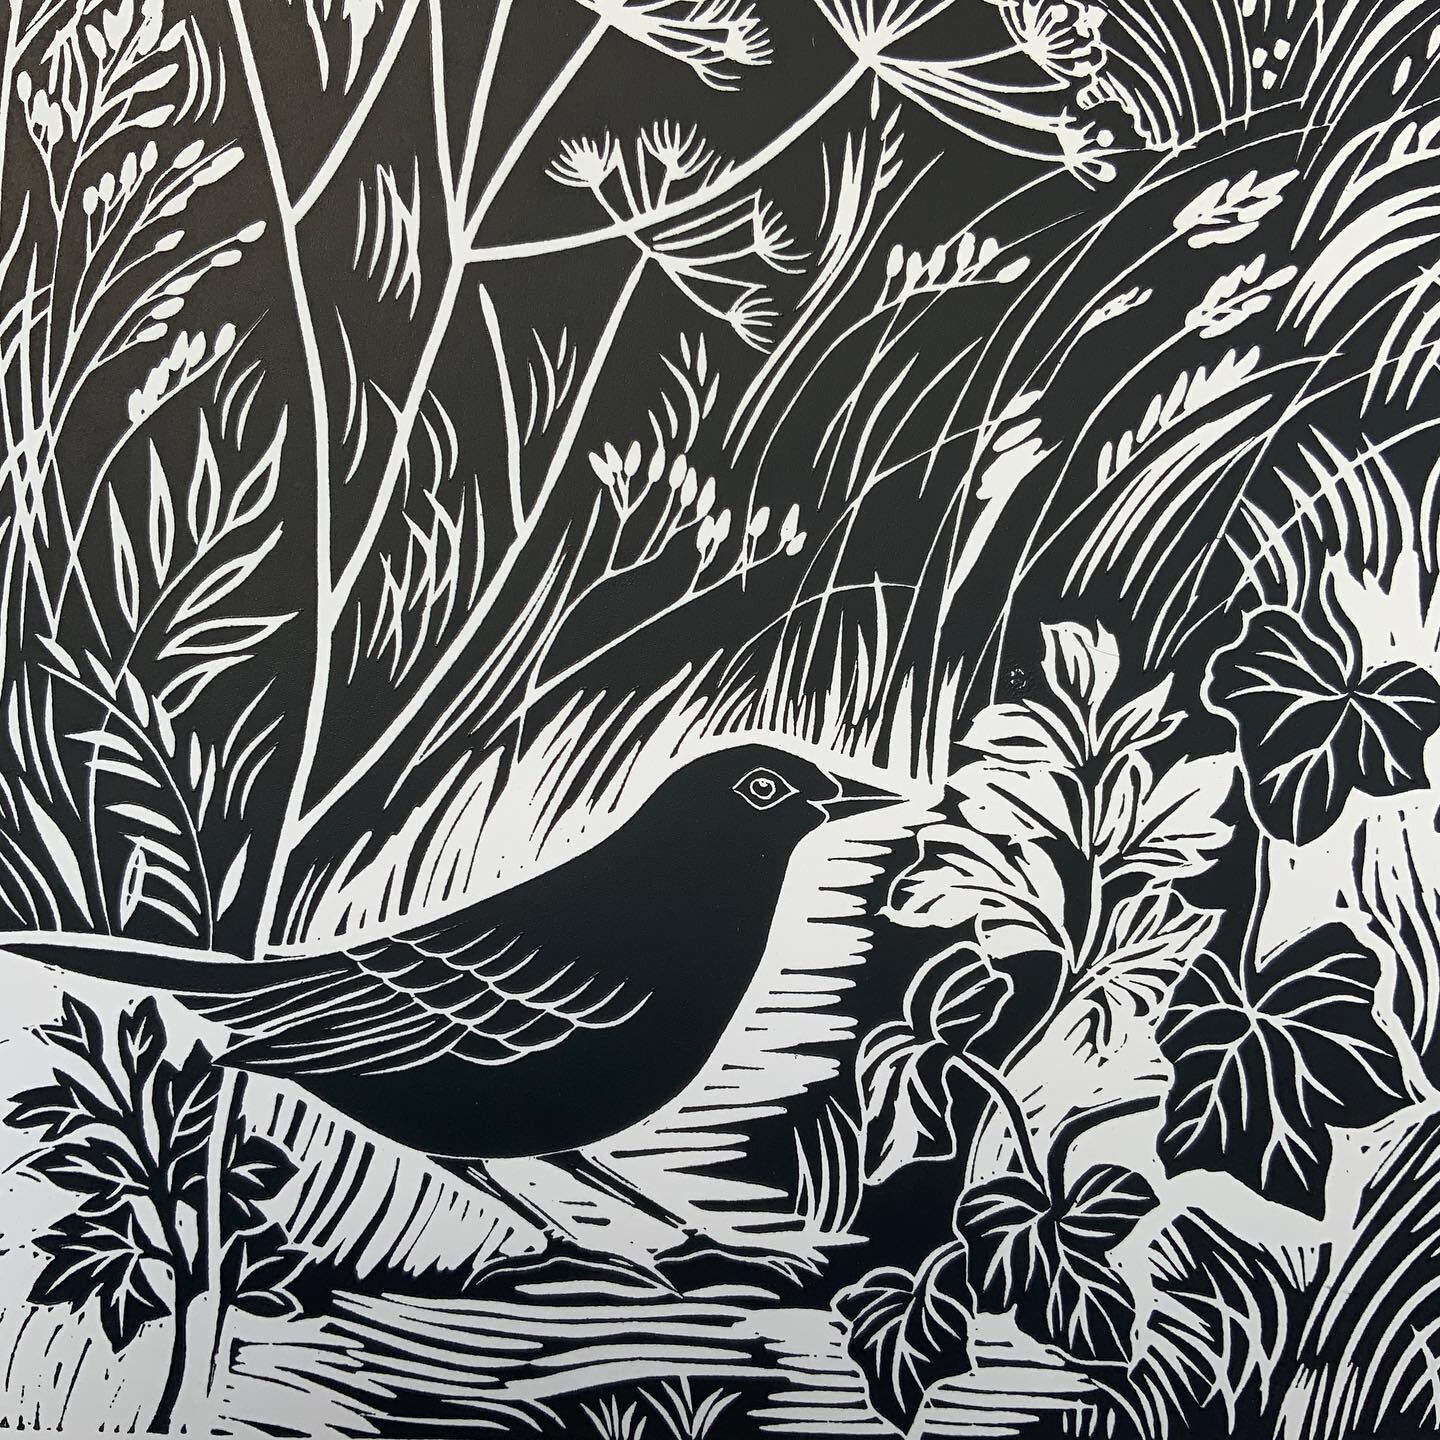 &lsquo;Meadow Blackbird&rsquo; 

Detail of my blackbird print.

Printed on A3 paper and the print is 20cm x 30cm 

Head over to my website if you would like one. 

viviennekeable.com

Free UK postage! I ship worldwide too. ✉️ 🐦 
.
.
.
#blackbird #li